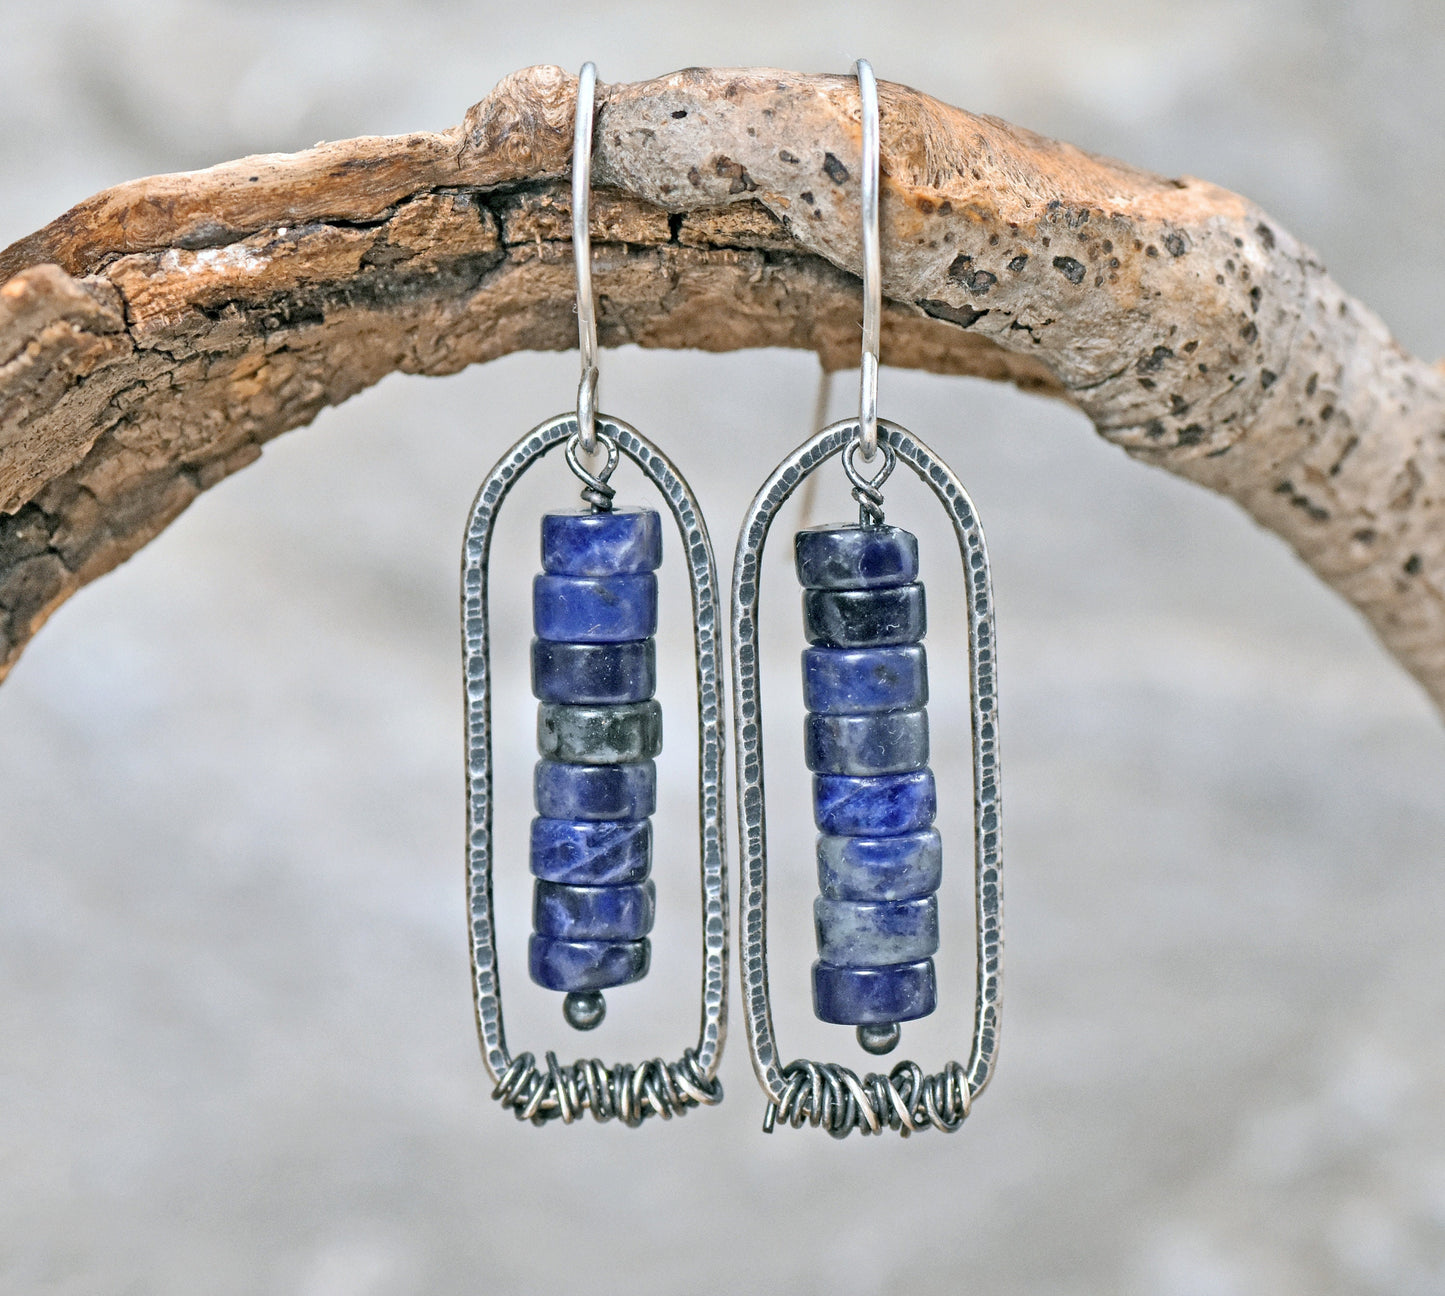 Sodalite Sterling Silver Earrings, Rustic Rectangle Dangles, Natural Dark Blue Gemstone Wire Jewelry